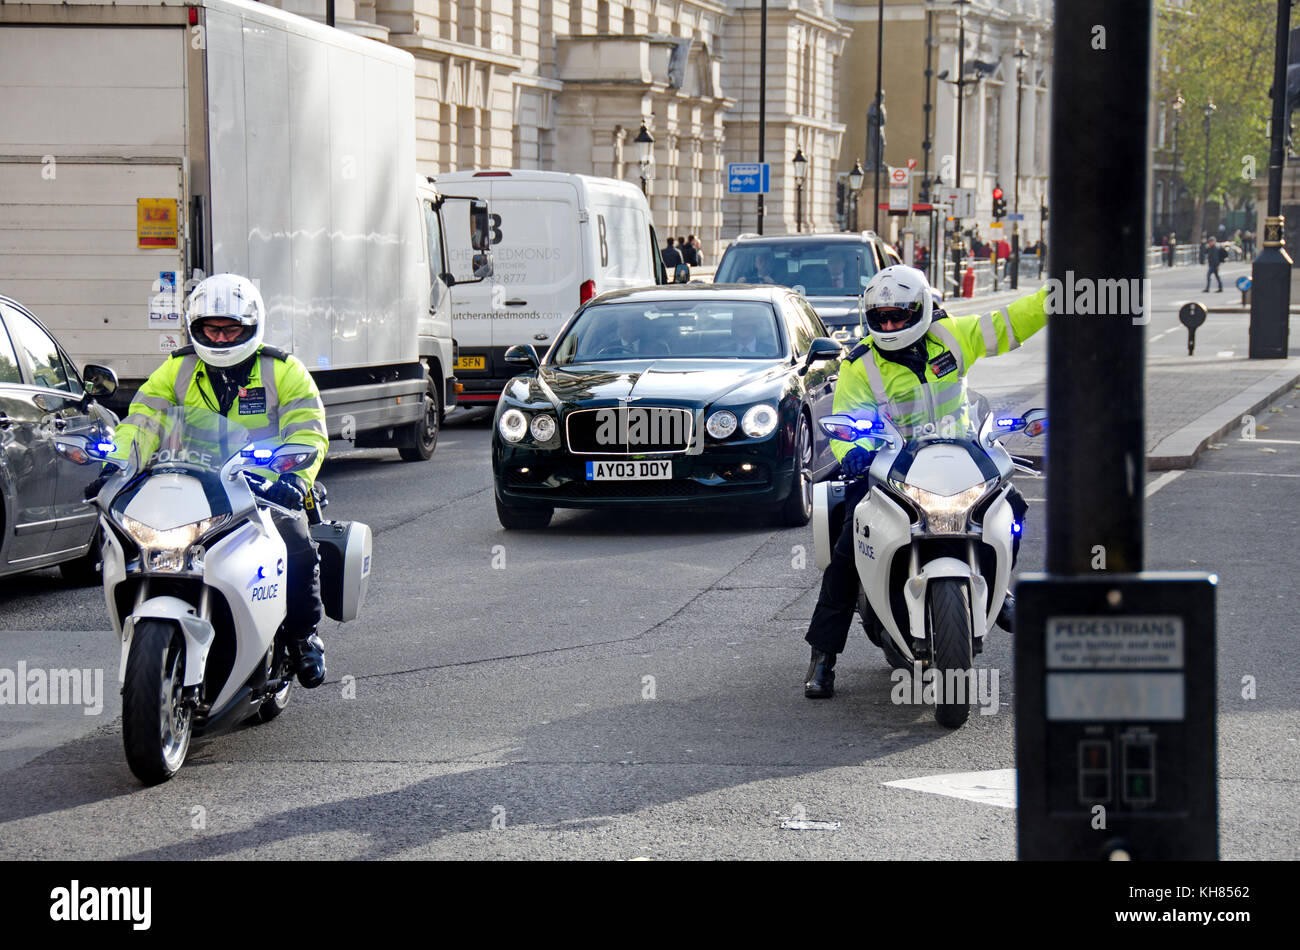 London, England, UK. Police motorcyclists stop the traffic in Whitehall for the Prime Minister's car Stock Photo